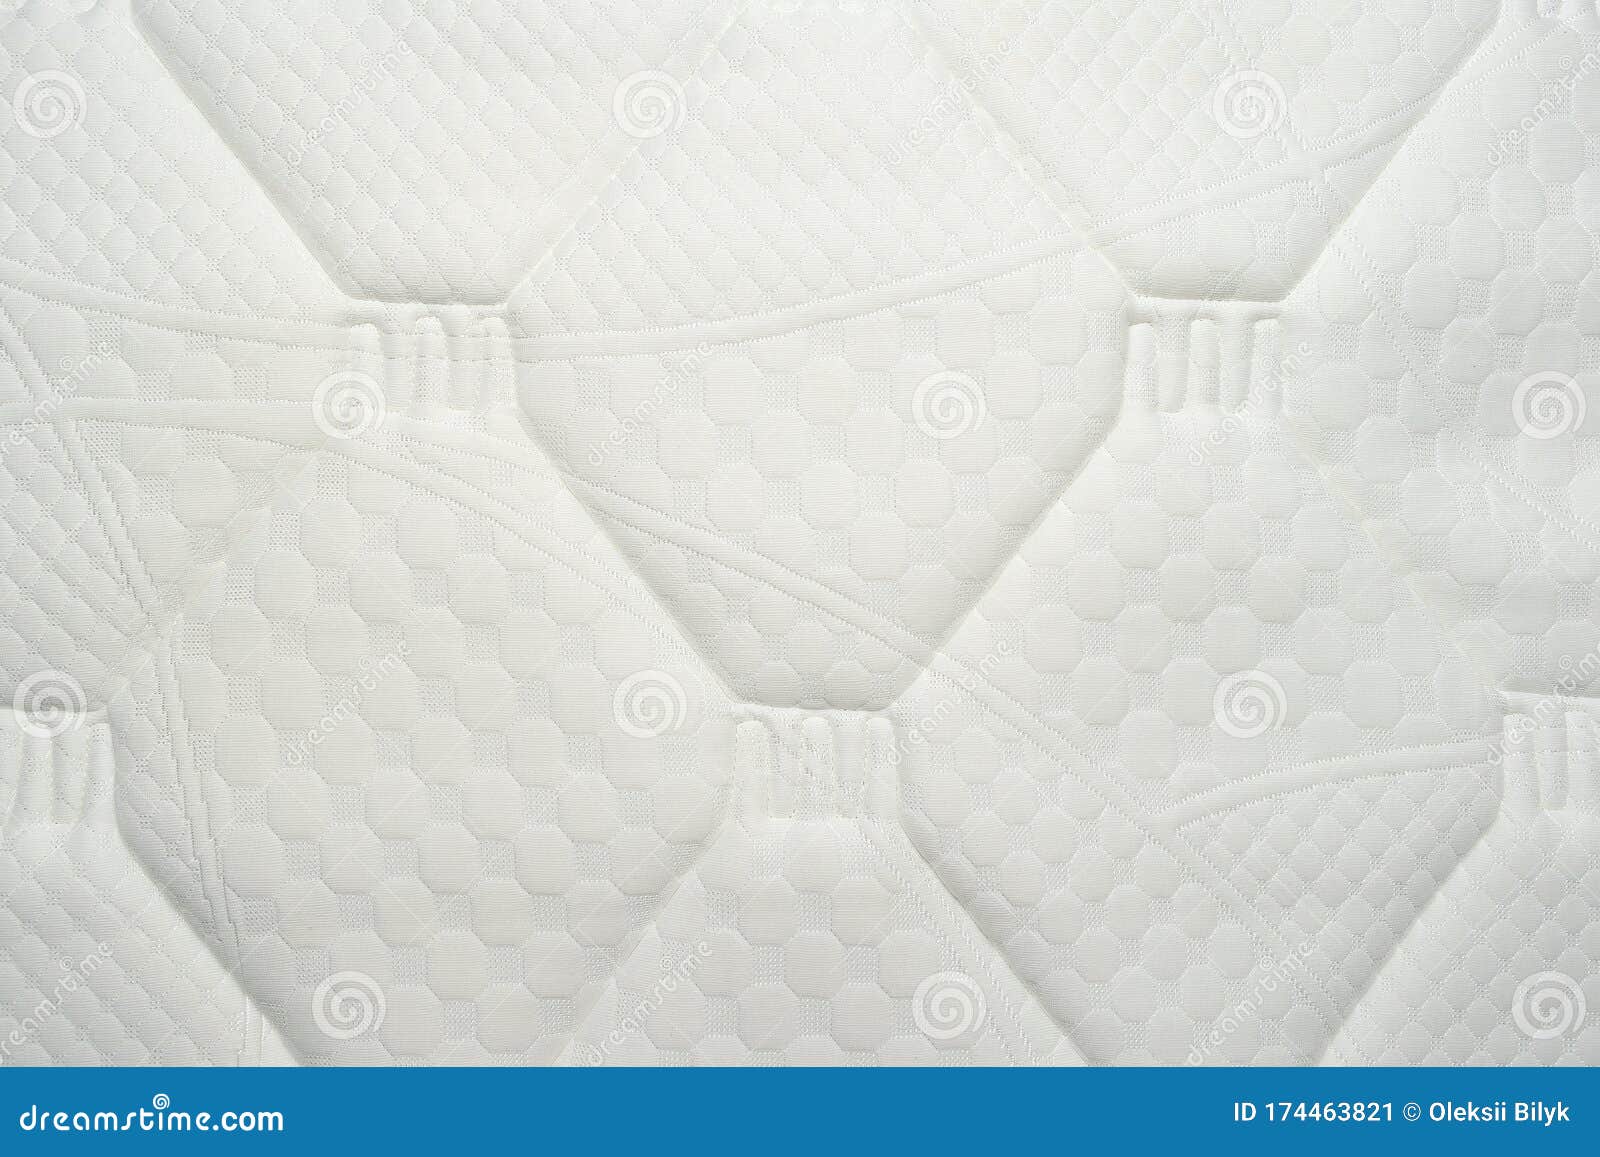 Mattress Surface. Clean White Fabric after Removing Stains Stock